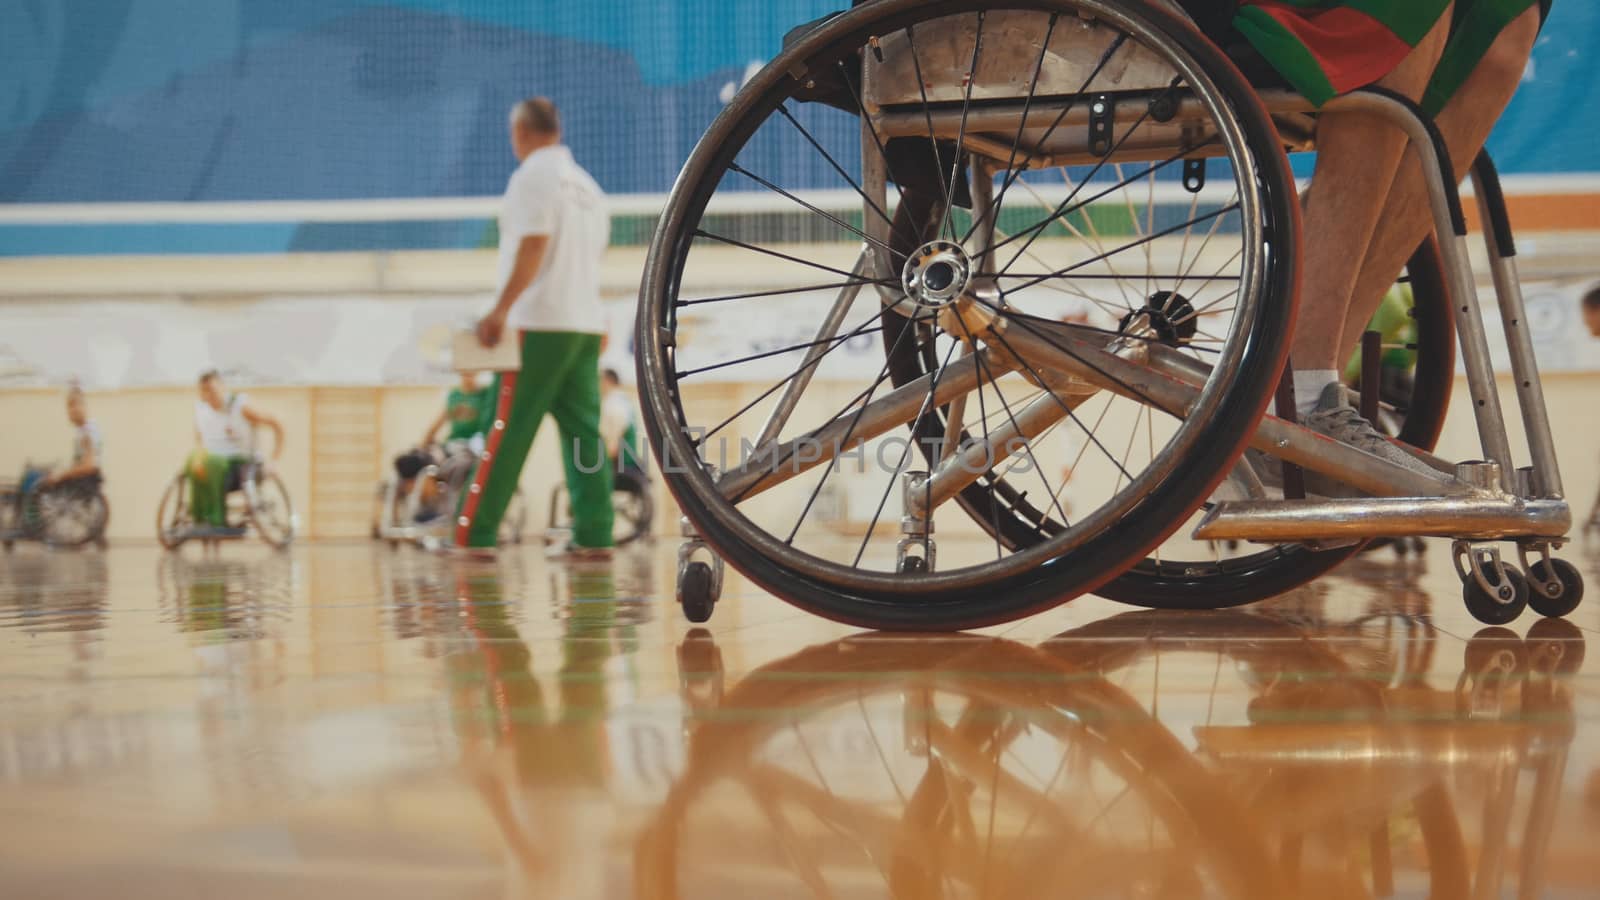 Wheel of handicapped basketball player in a wheelchair during sportive training by Studia72